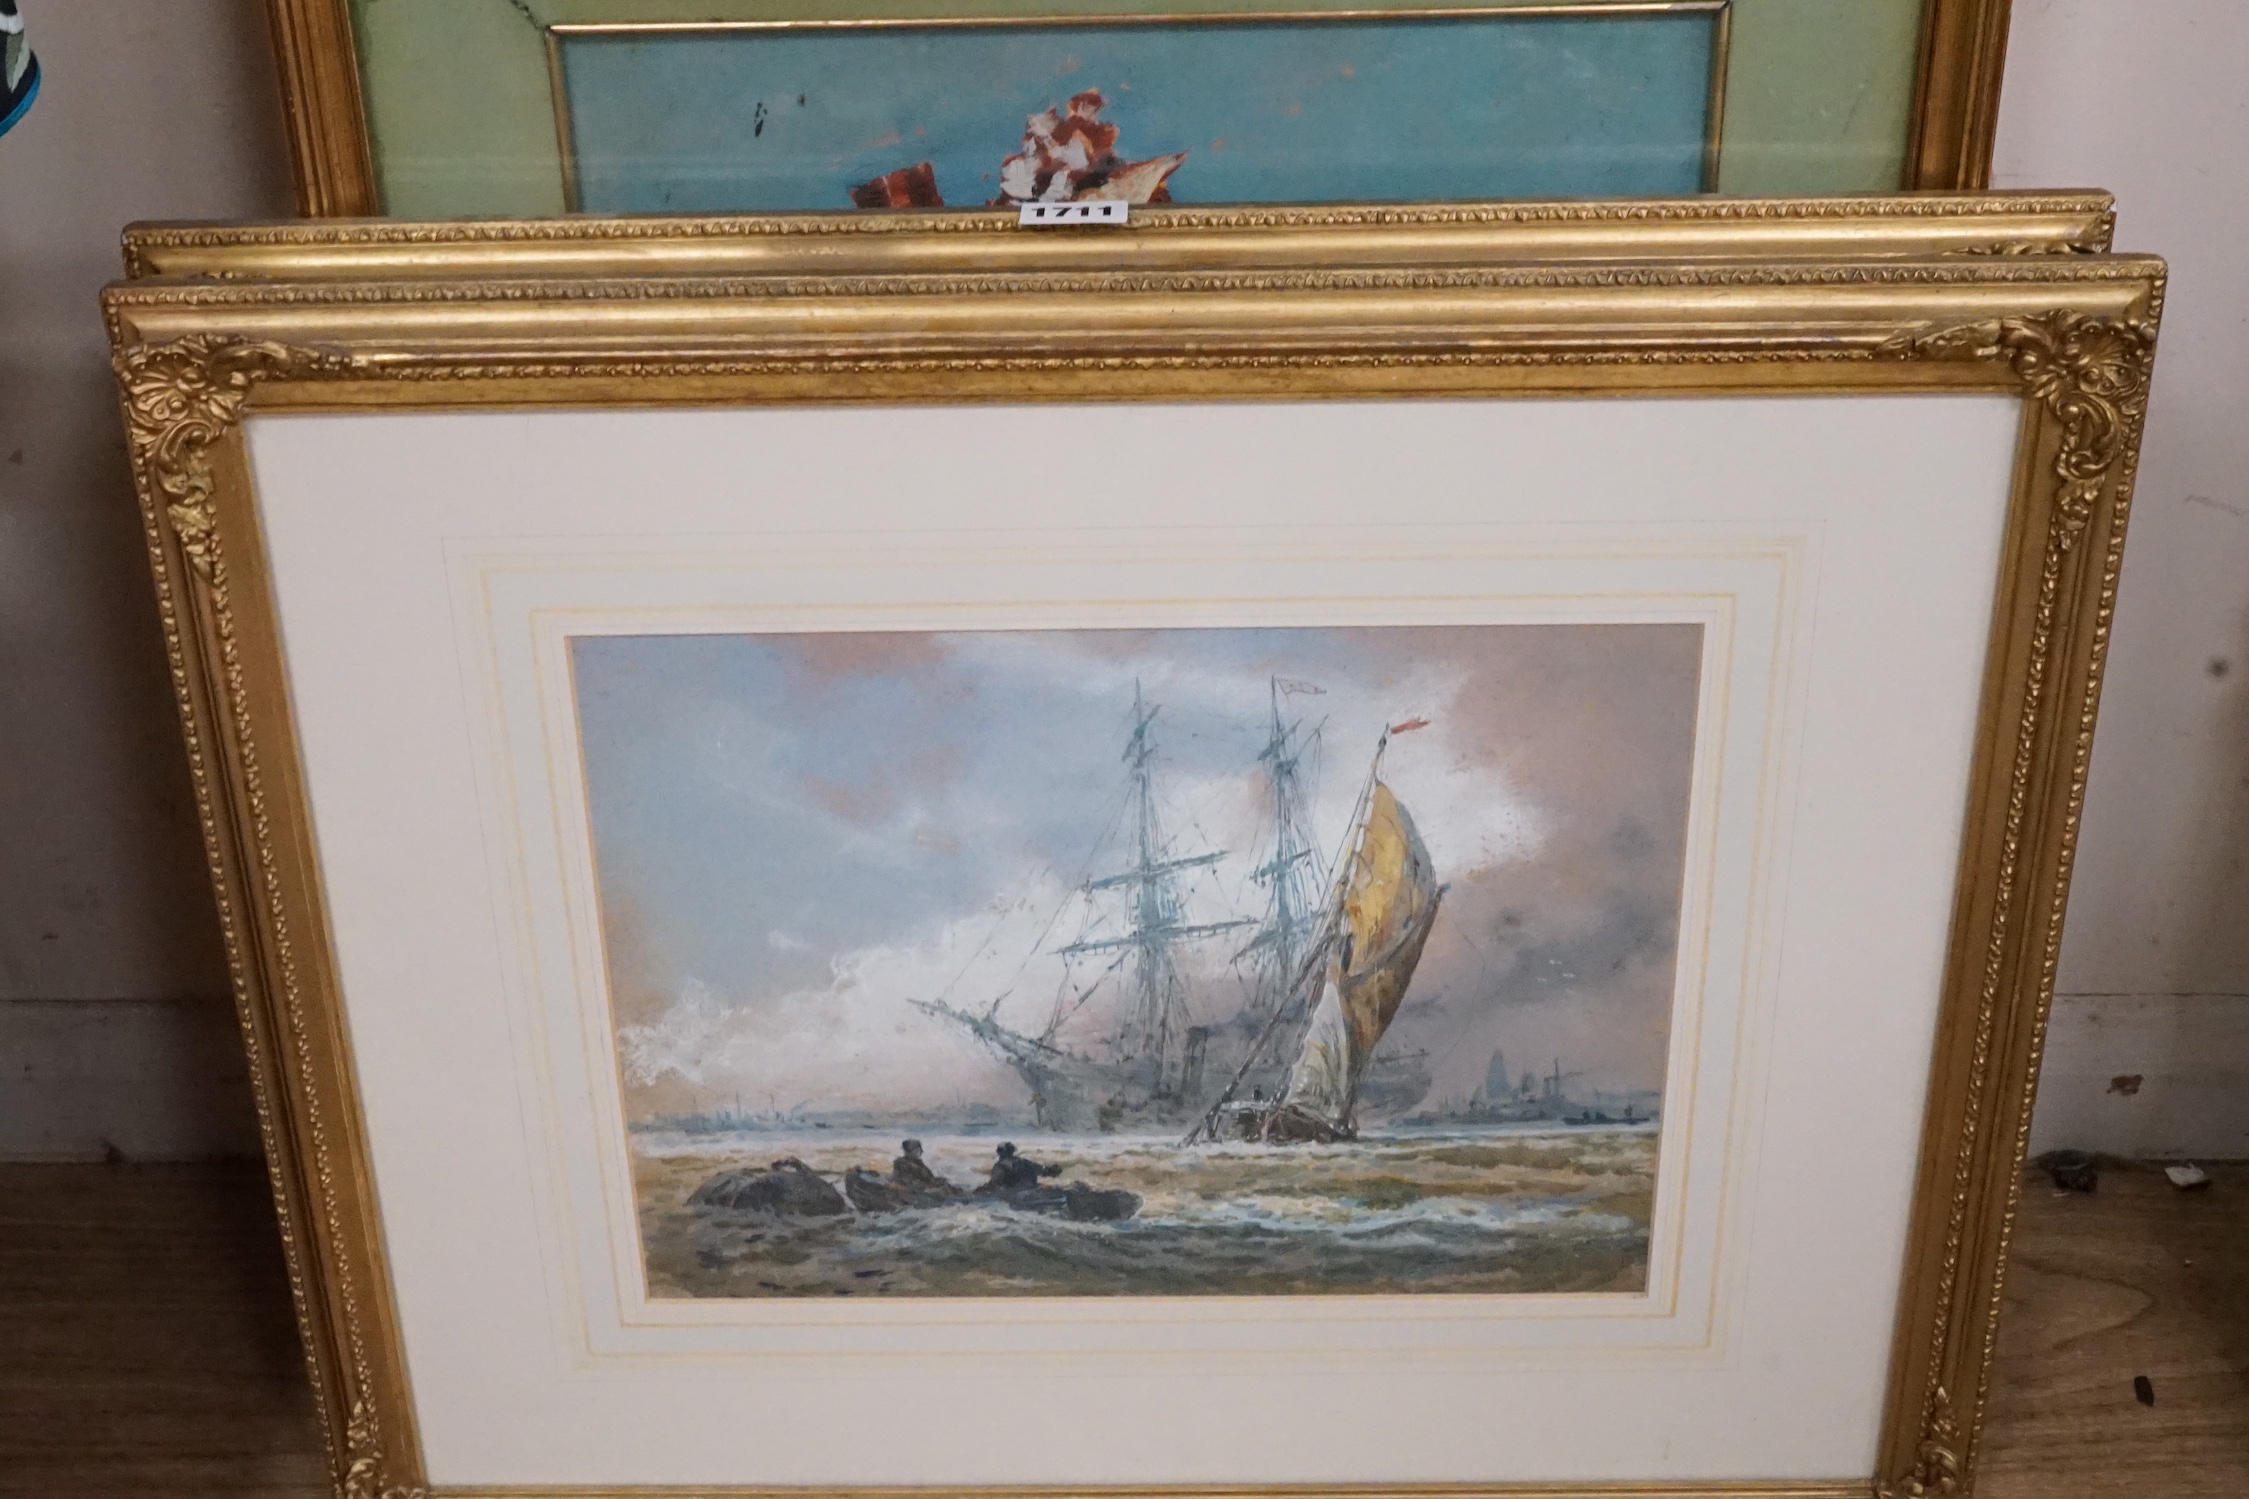 Sydney Goodwin (1867-1944), pair of watercolours, 'Barge out of Portsmouth' and 'Barge on the Thames picking up a mooring', unsigned, 25 x 33cm